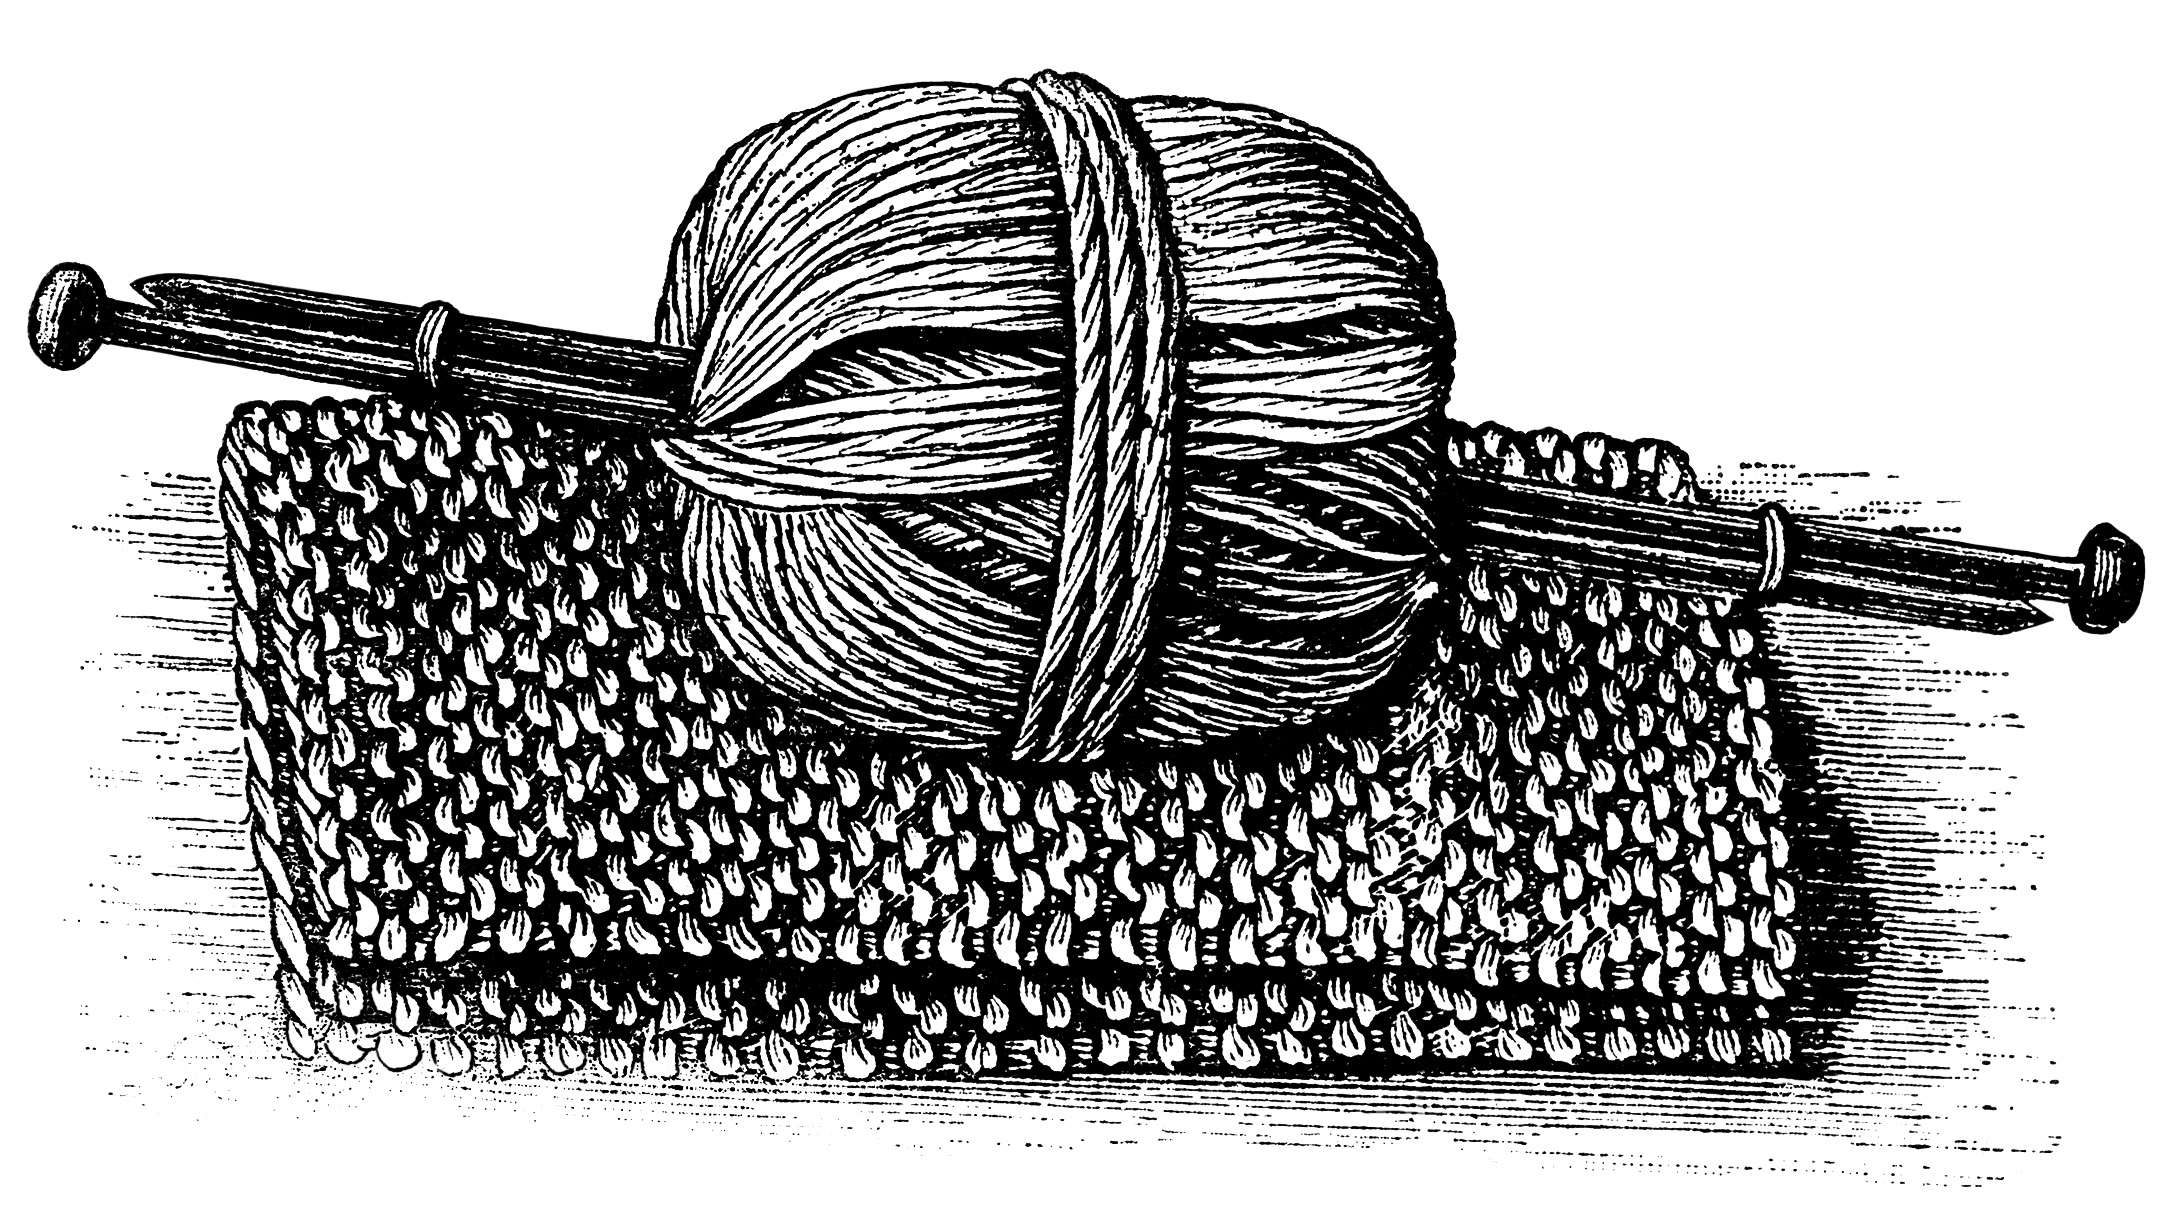 Clip Arts Related To : knitting and crocheting clipart. view all Yarn Clipa...